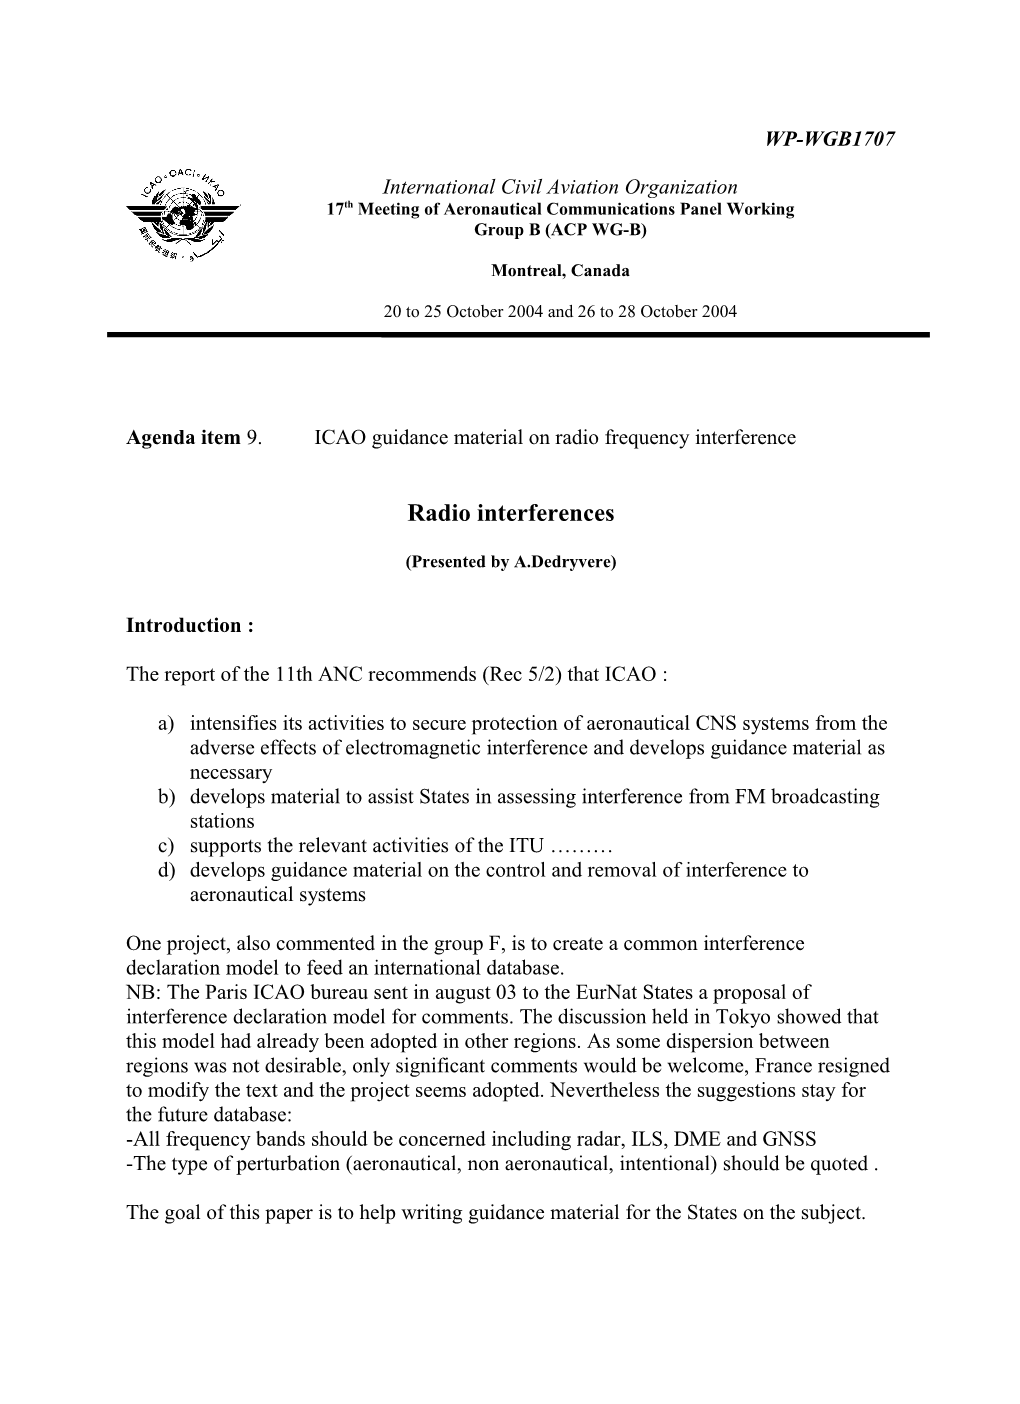 Agenda Item 9. ICAO Guidance Material on Radio Frequency Interference